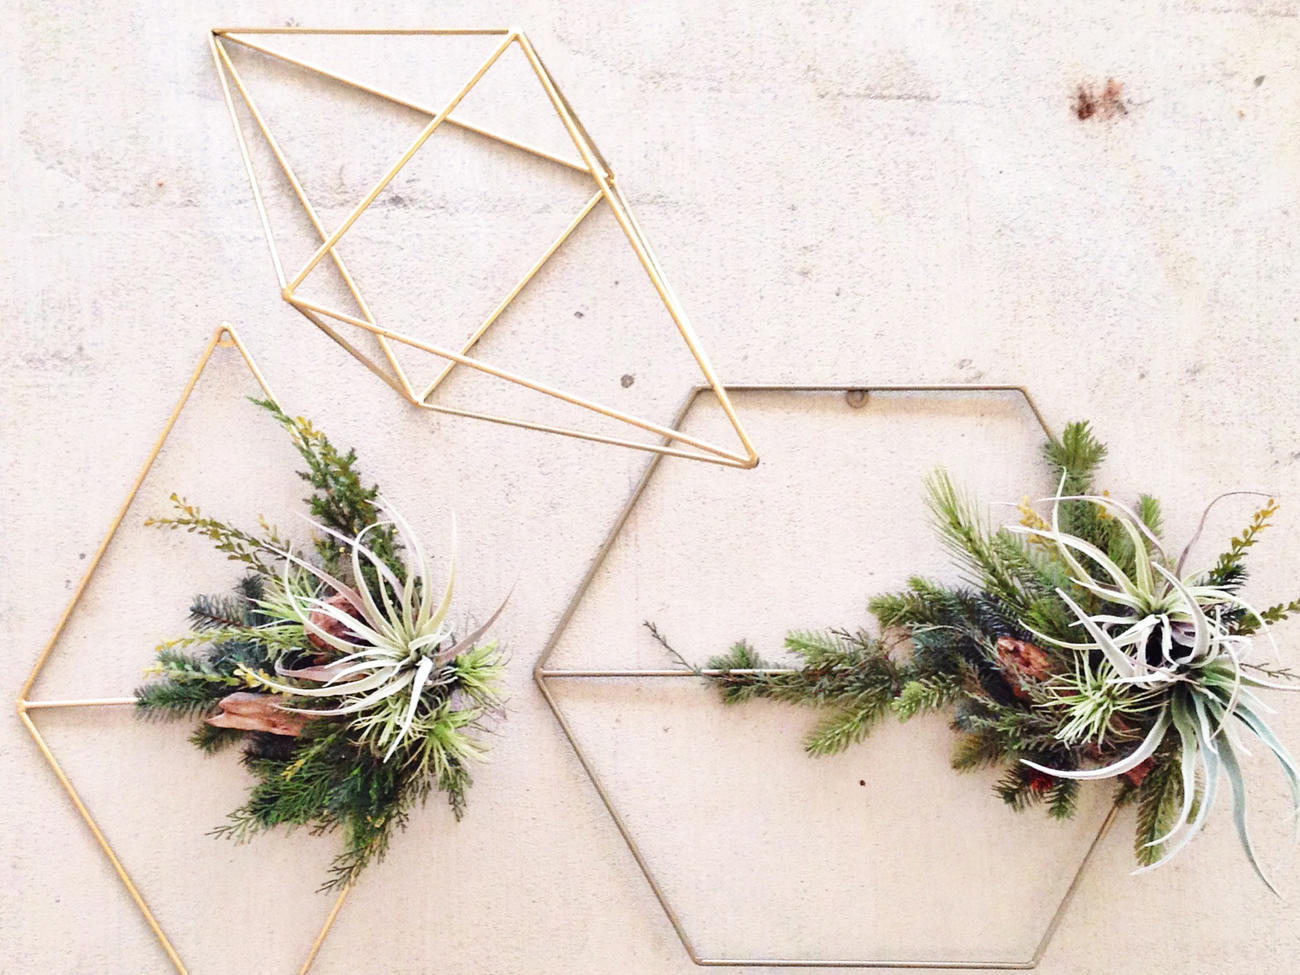 Trend we’re loving: Geometric for the holidays